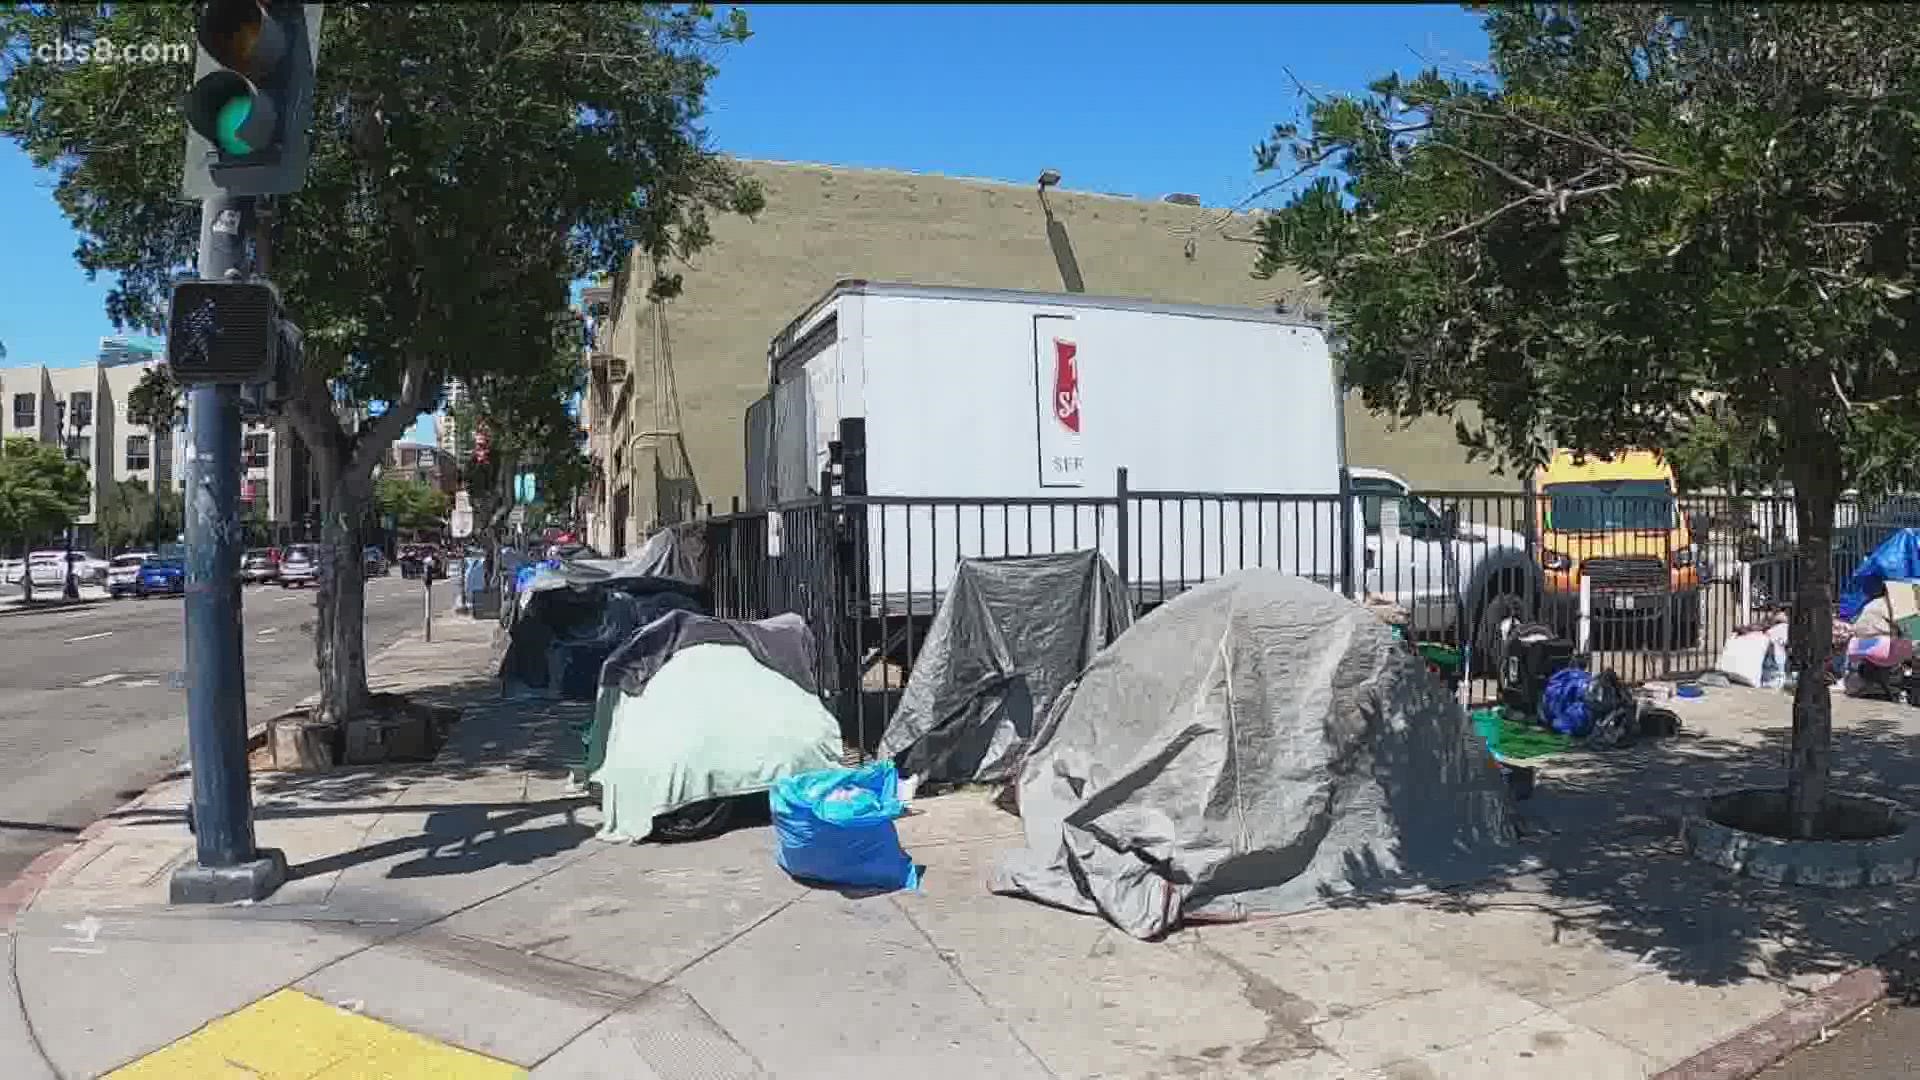 There's an estimated 1,300 homeless people in downtown San Diego, which is nearly double compared to last year.